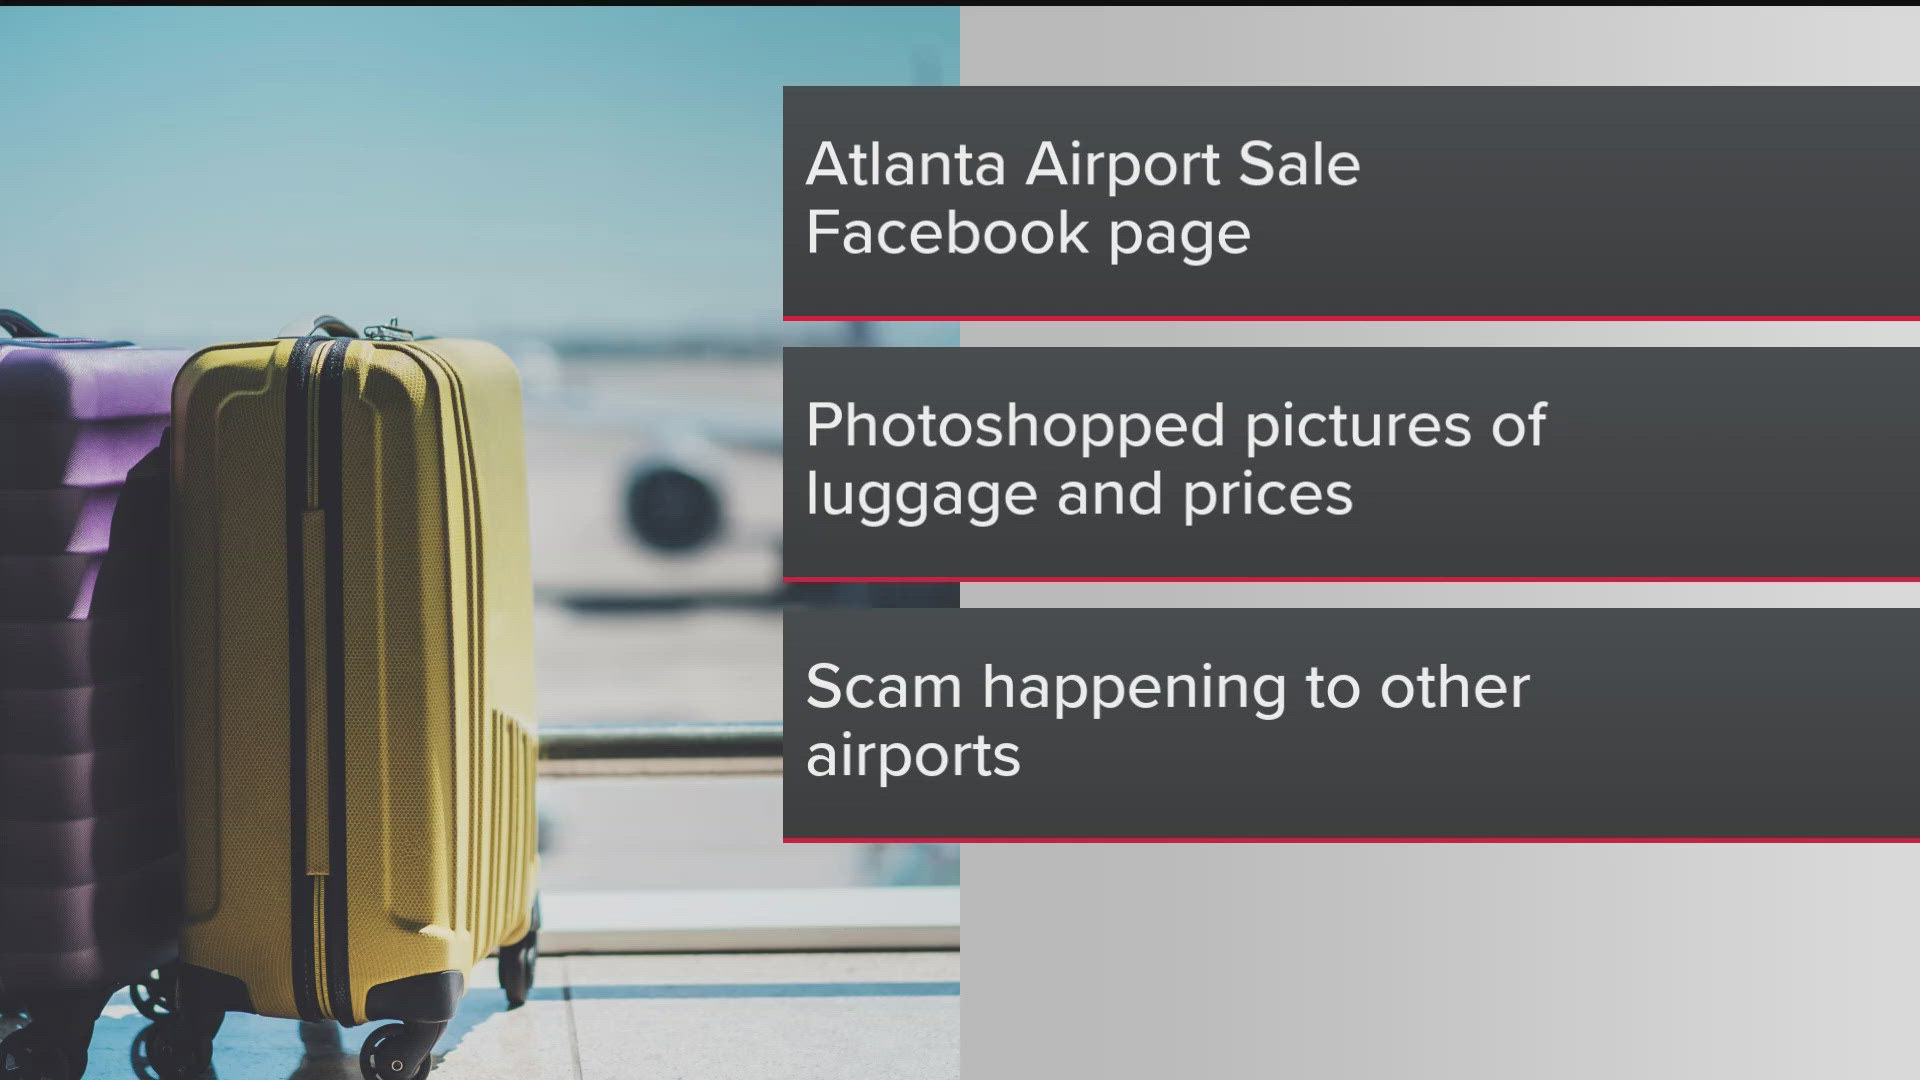 11Alive is warning passengers to look out for the scam.